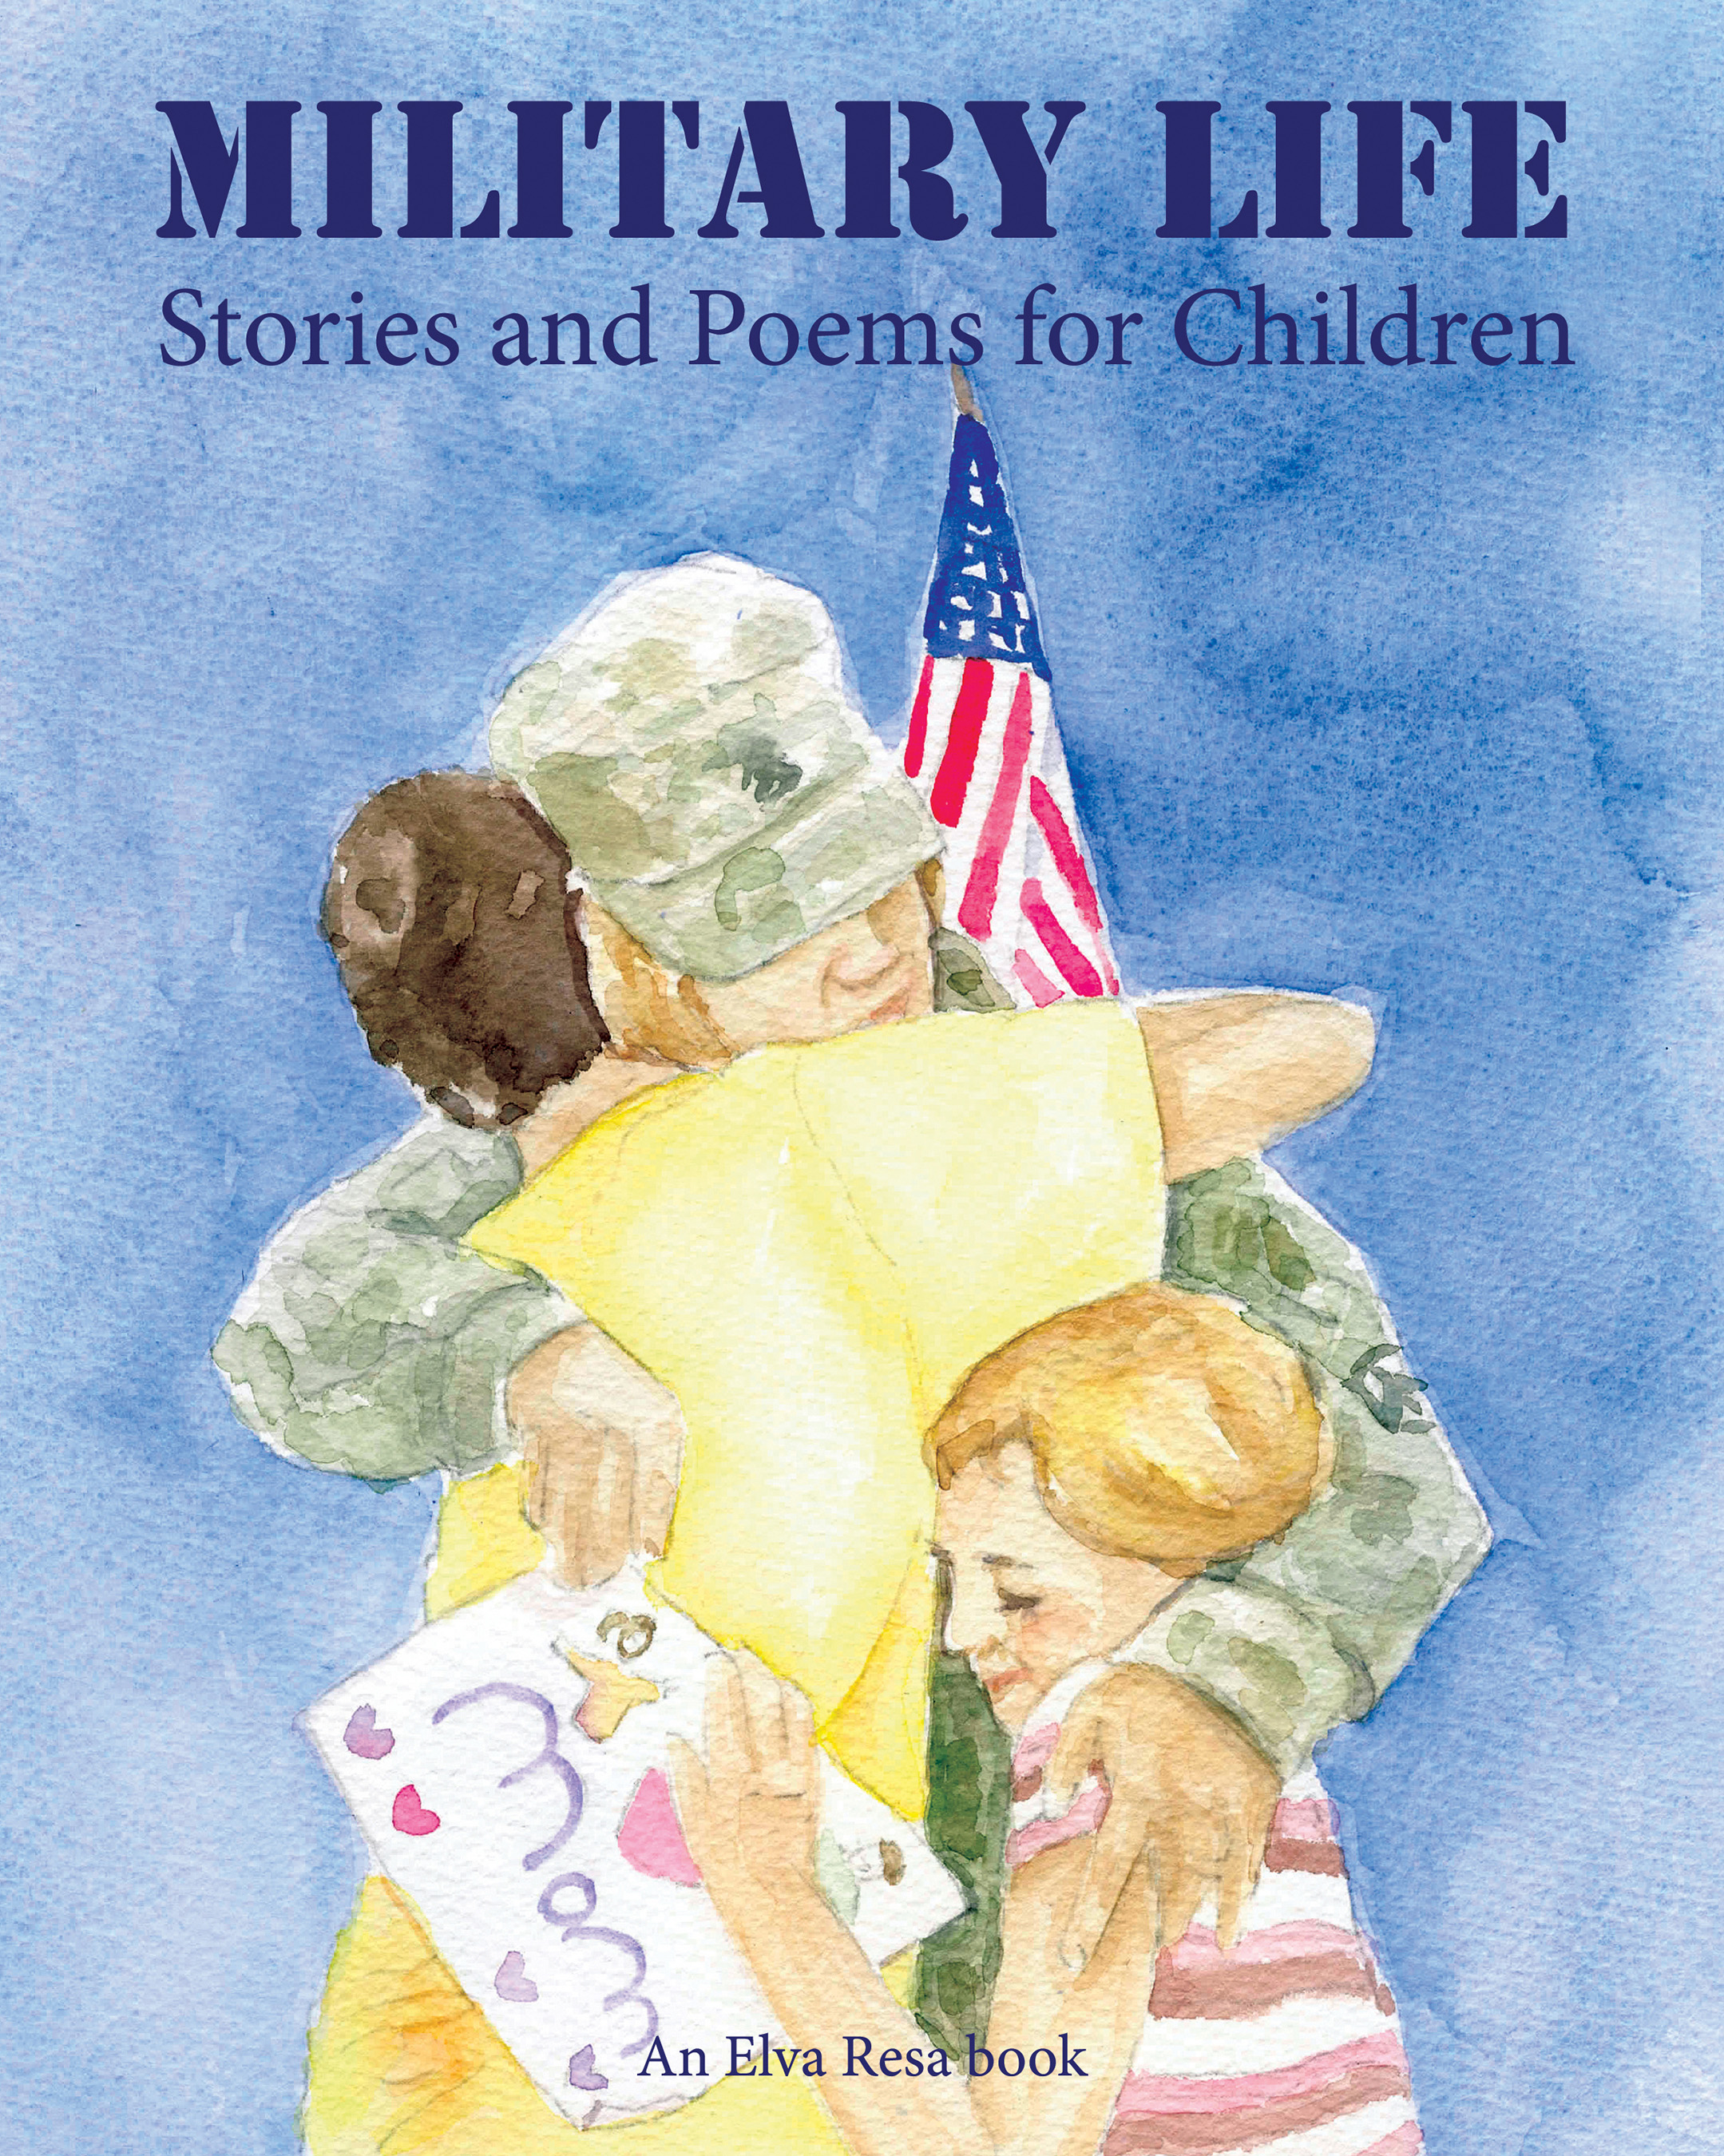 "Love Letters" poem by Karen Pavlicin in Military Life: Stories and Poems for Children